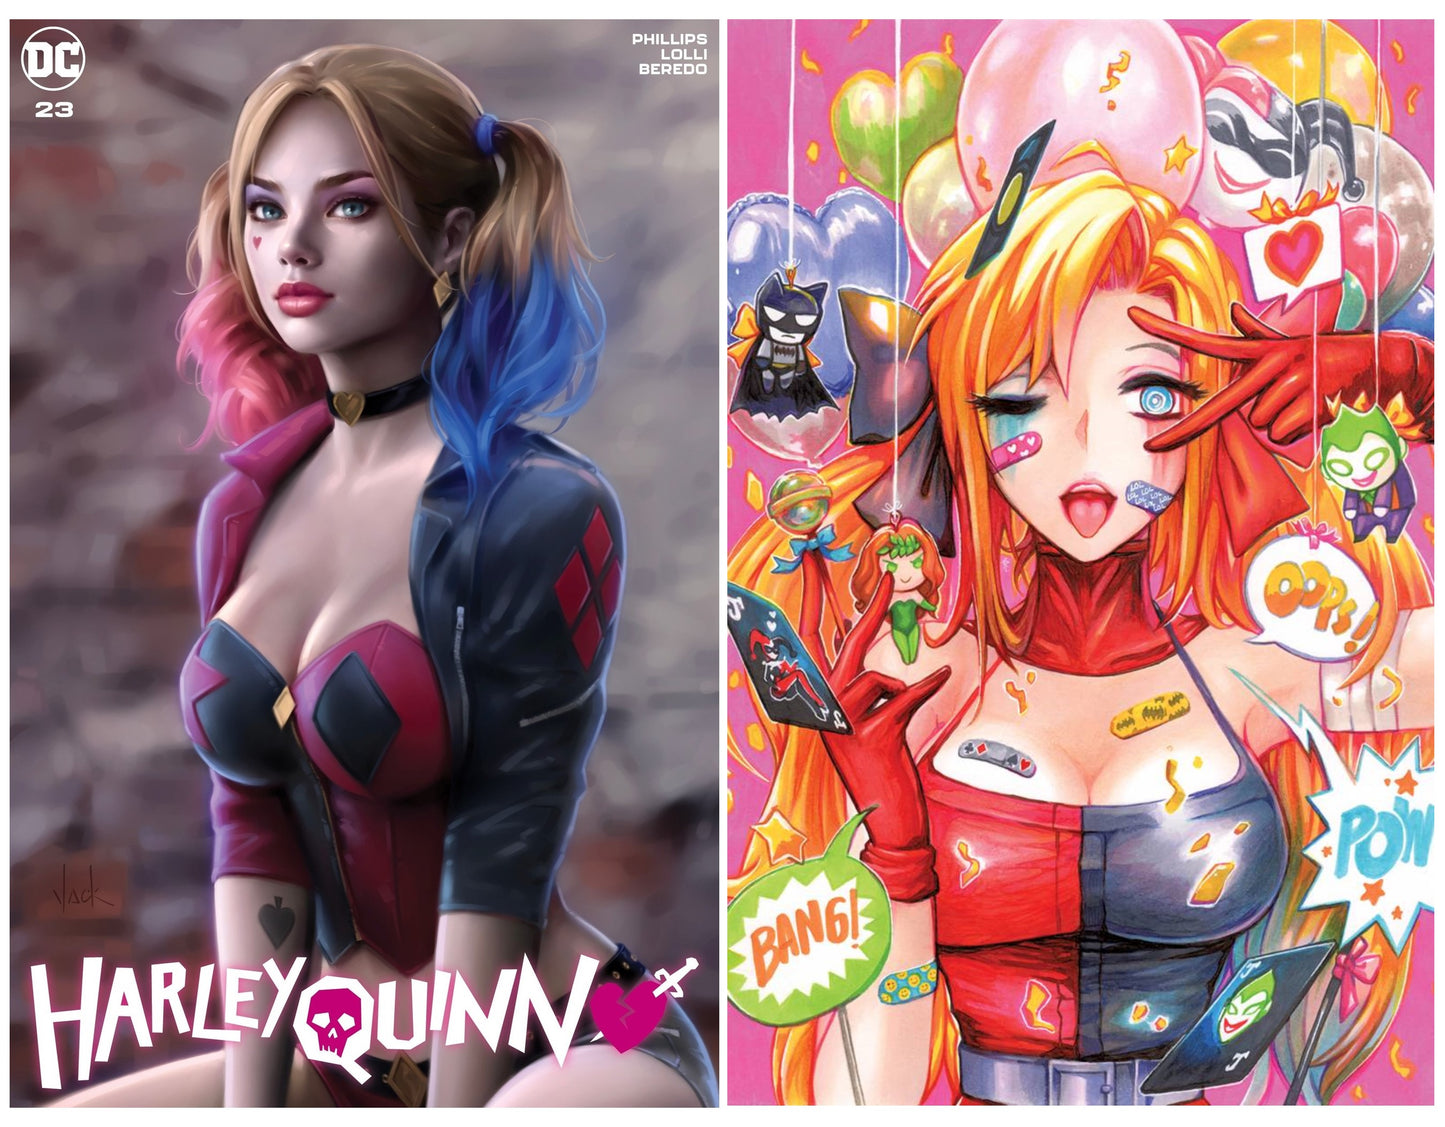 HARLEY QUINN #23 WILL JACK VARIANT LIMITED TO 800 COPIES WITH NUMBERED COA + 1:25 VARIANT